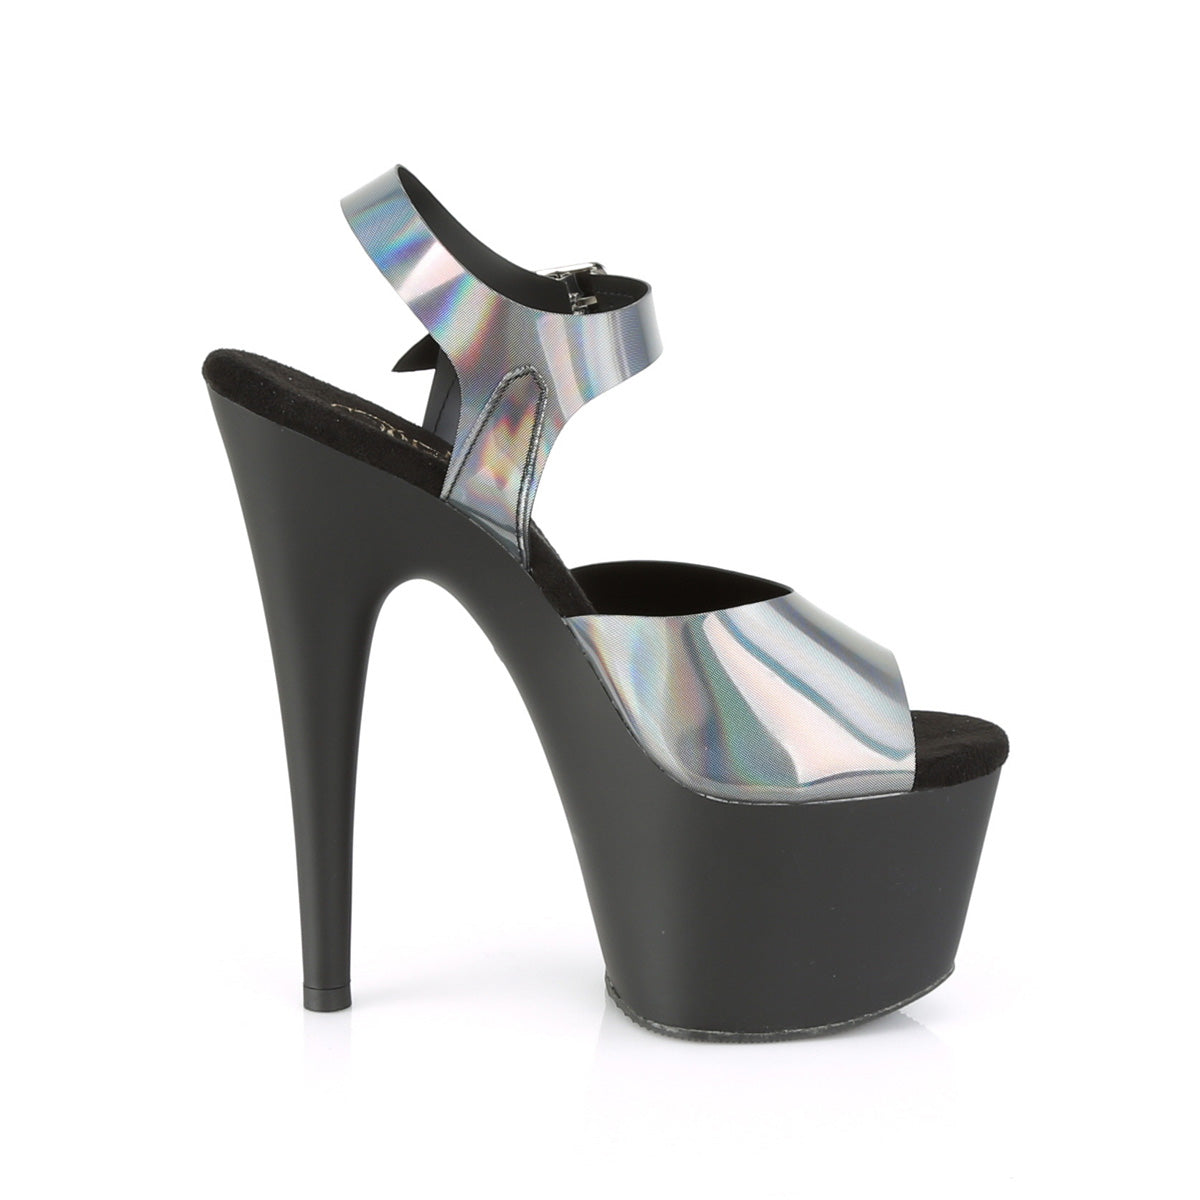 ADORE-708N-DT Pleaser Sexy 7" Heel Pewter Pole Dancer Shoes-Pleaser- Sexy Shoes Fetish Heels